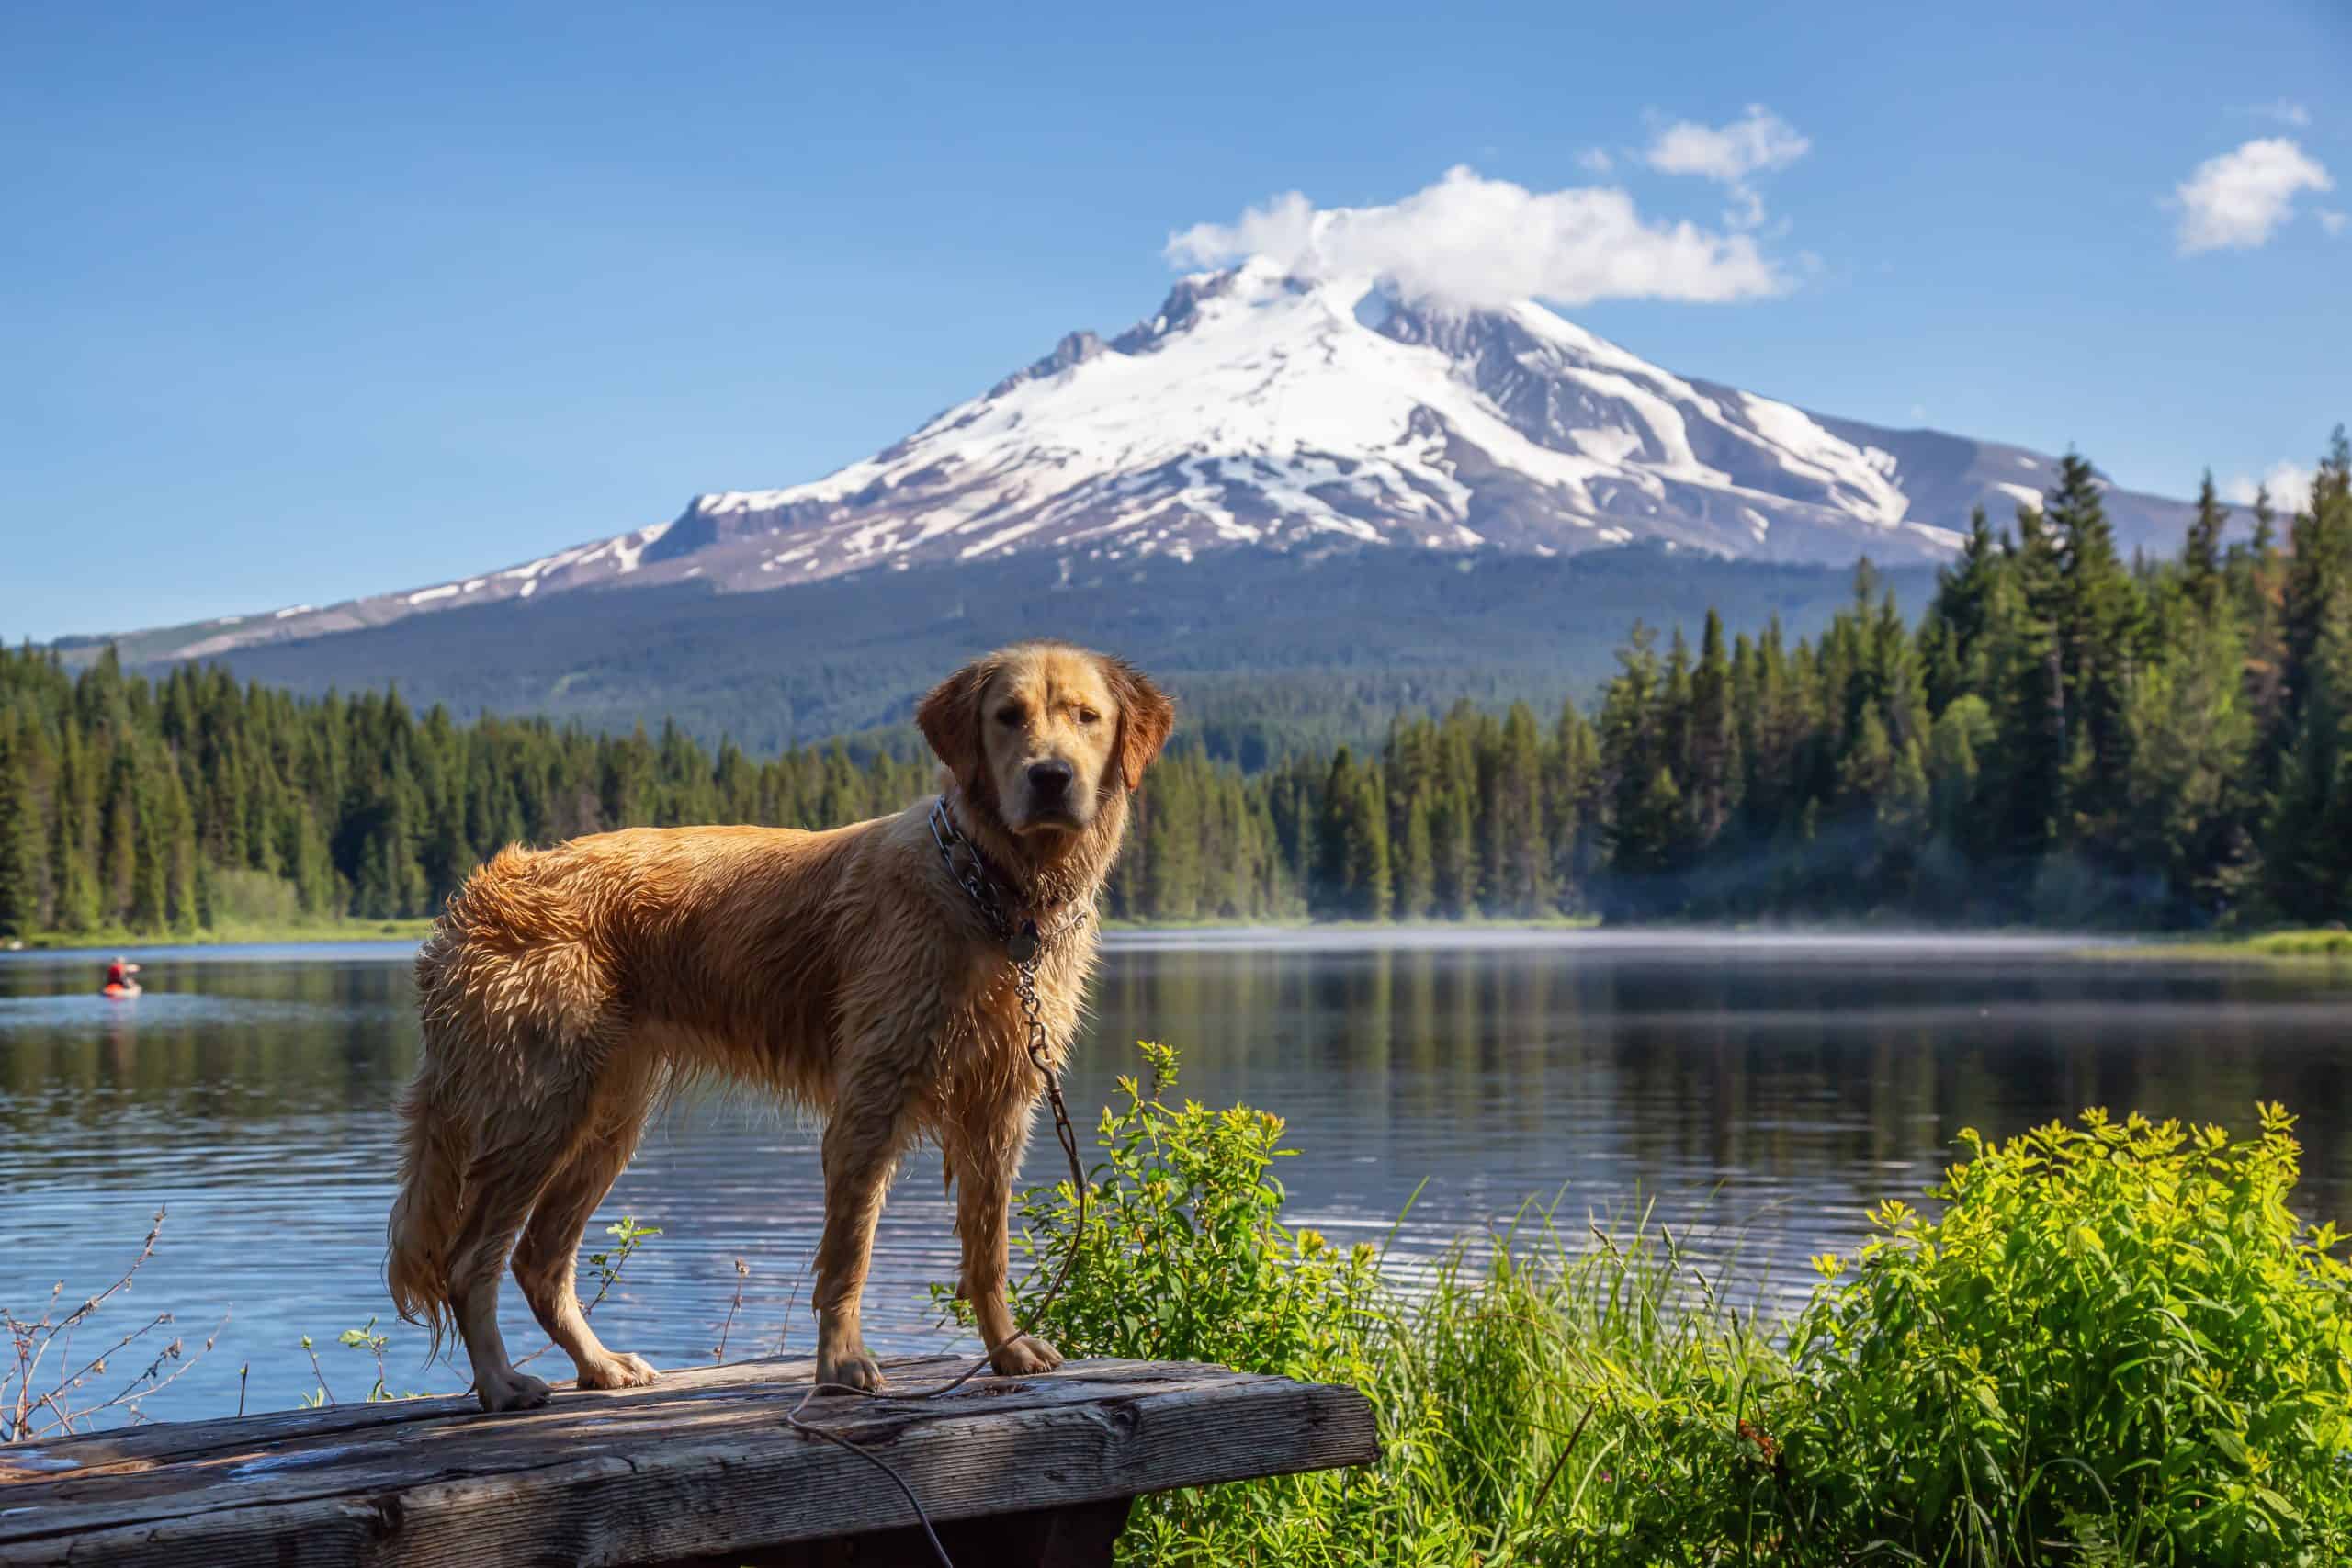 Golden Retriever is standing by the beautiful lake with Hood Mountain Peak in the background during a vibrant sunny summer day. Taken from Trillium Lake, Mt. Hood National Forest; how do you pick your name for your puppy?